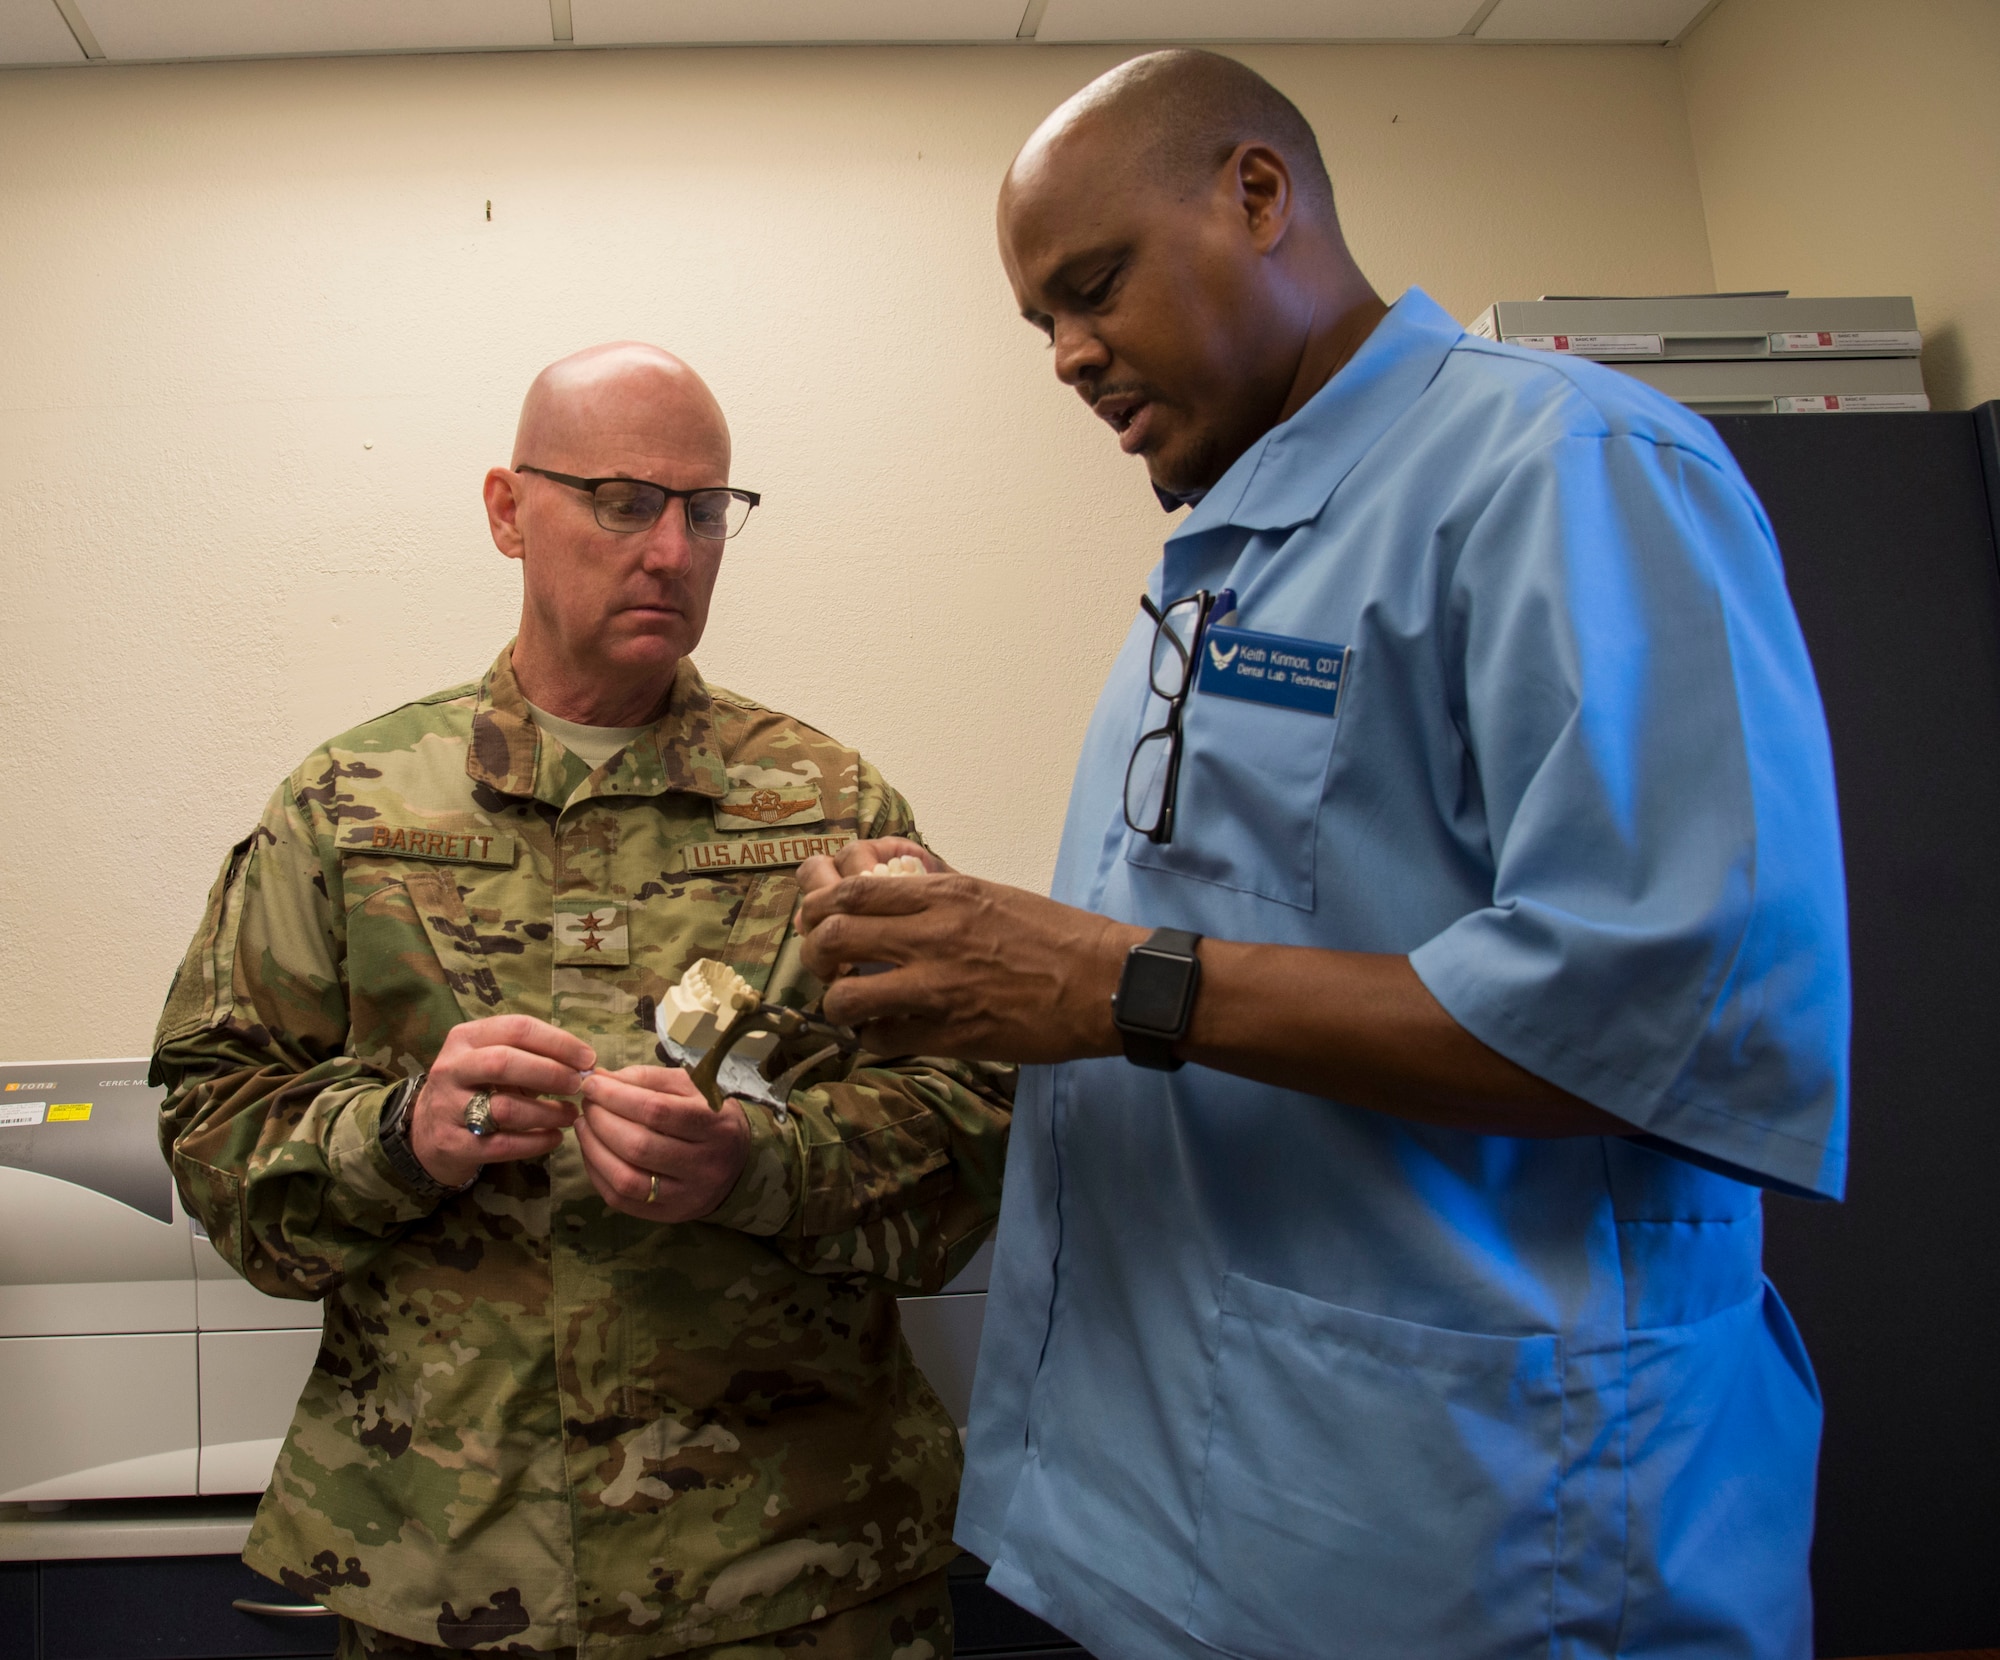 Maj Gen. Sam Barrett, 18th Air Force commander, is shown the process to make a dental crown by Keith Kimmon 375th Dental Squadron dental lab technician, Oct.11, 2018, at Scott Air Force Base, Illinois. The 375th Dental squadron is responsible for providing dental care to all members of Scott AIR FORCE BASE. (U.S. Air Force photo by Airman 1st Class Nathaniel Hudson)